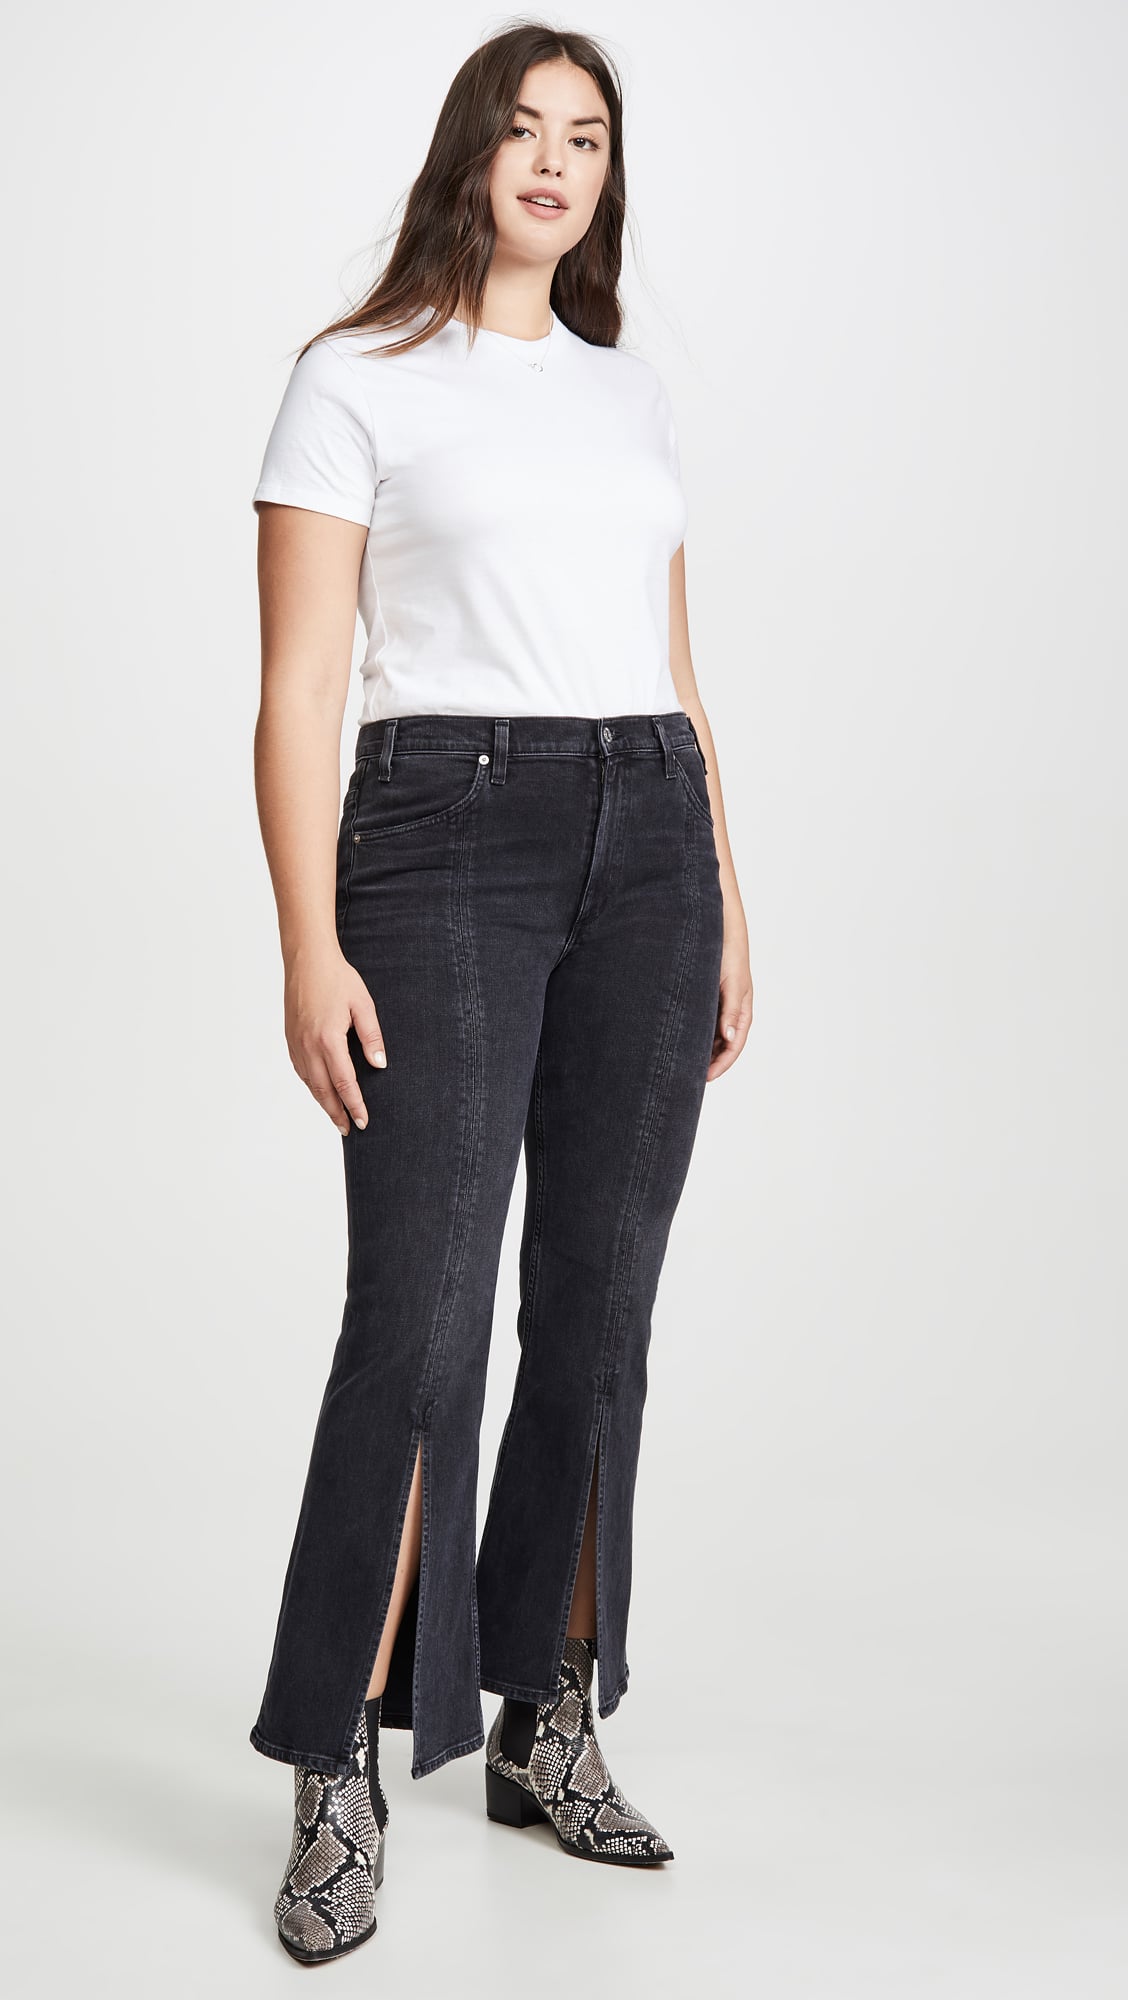 ankle flare pants